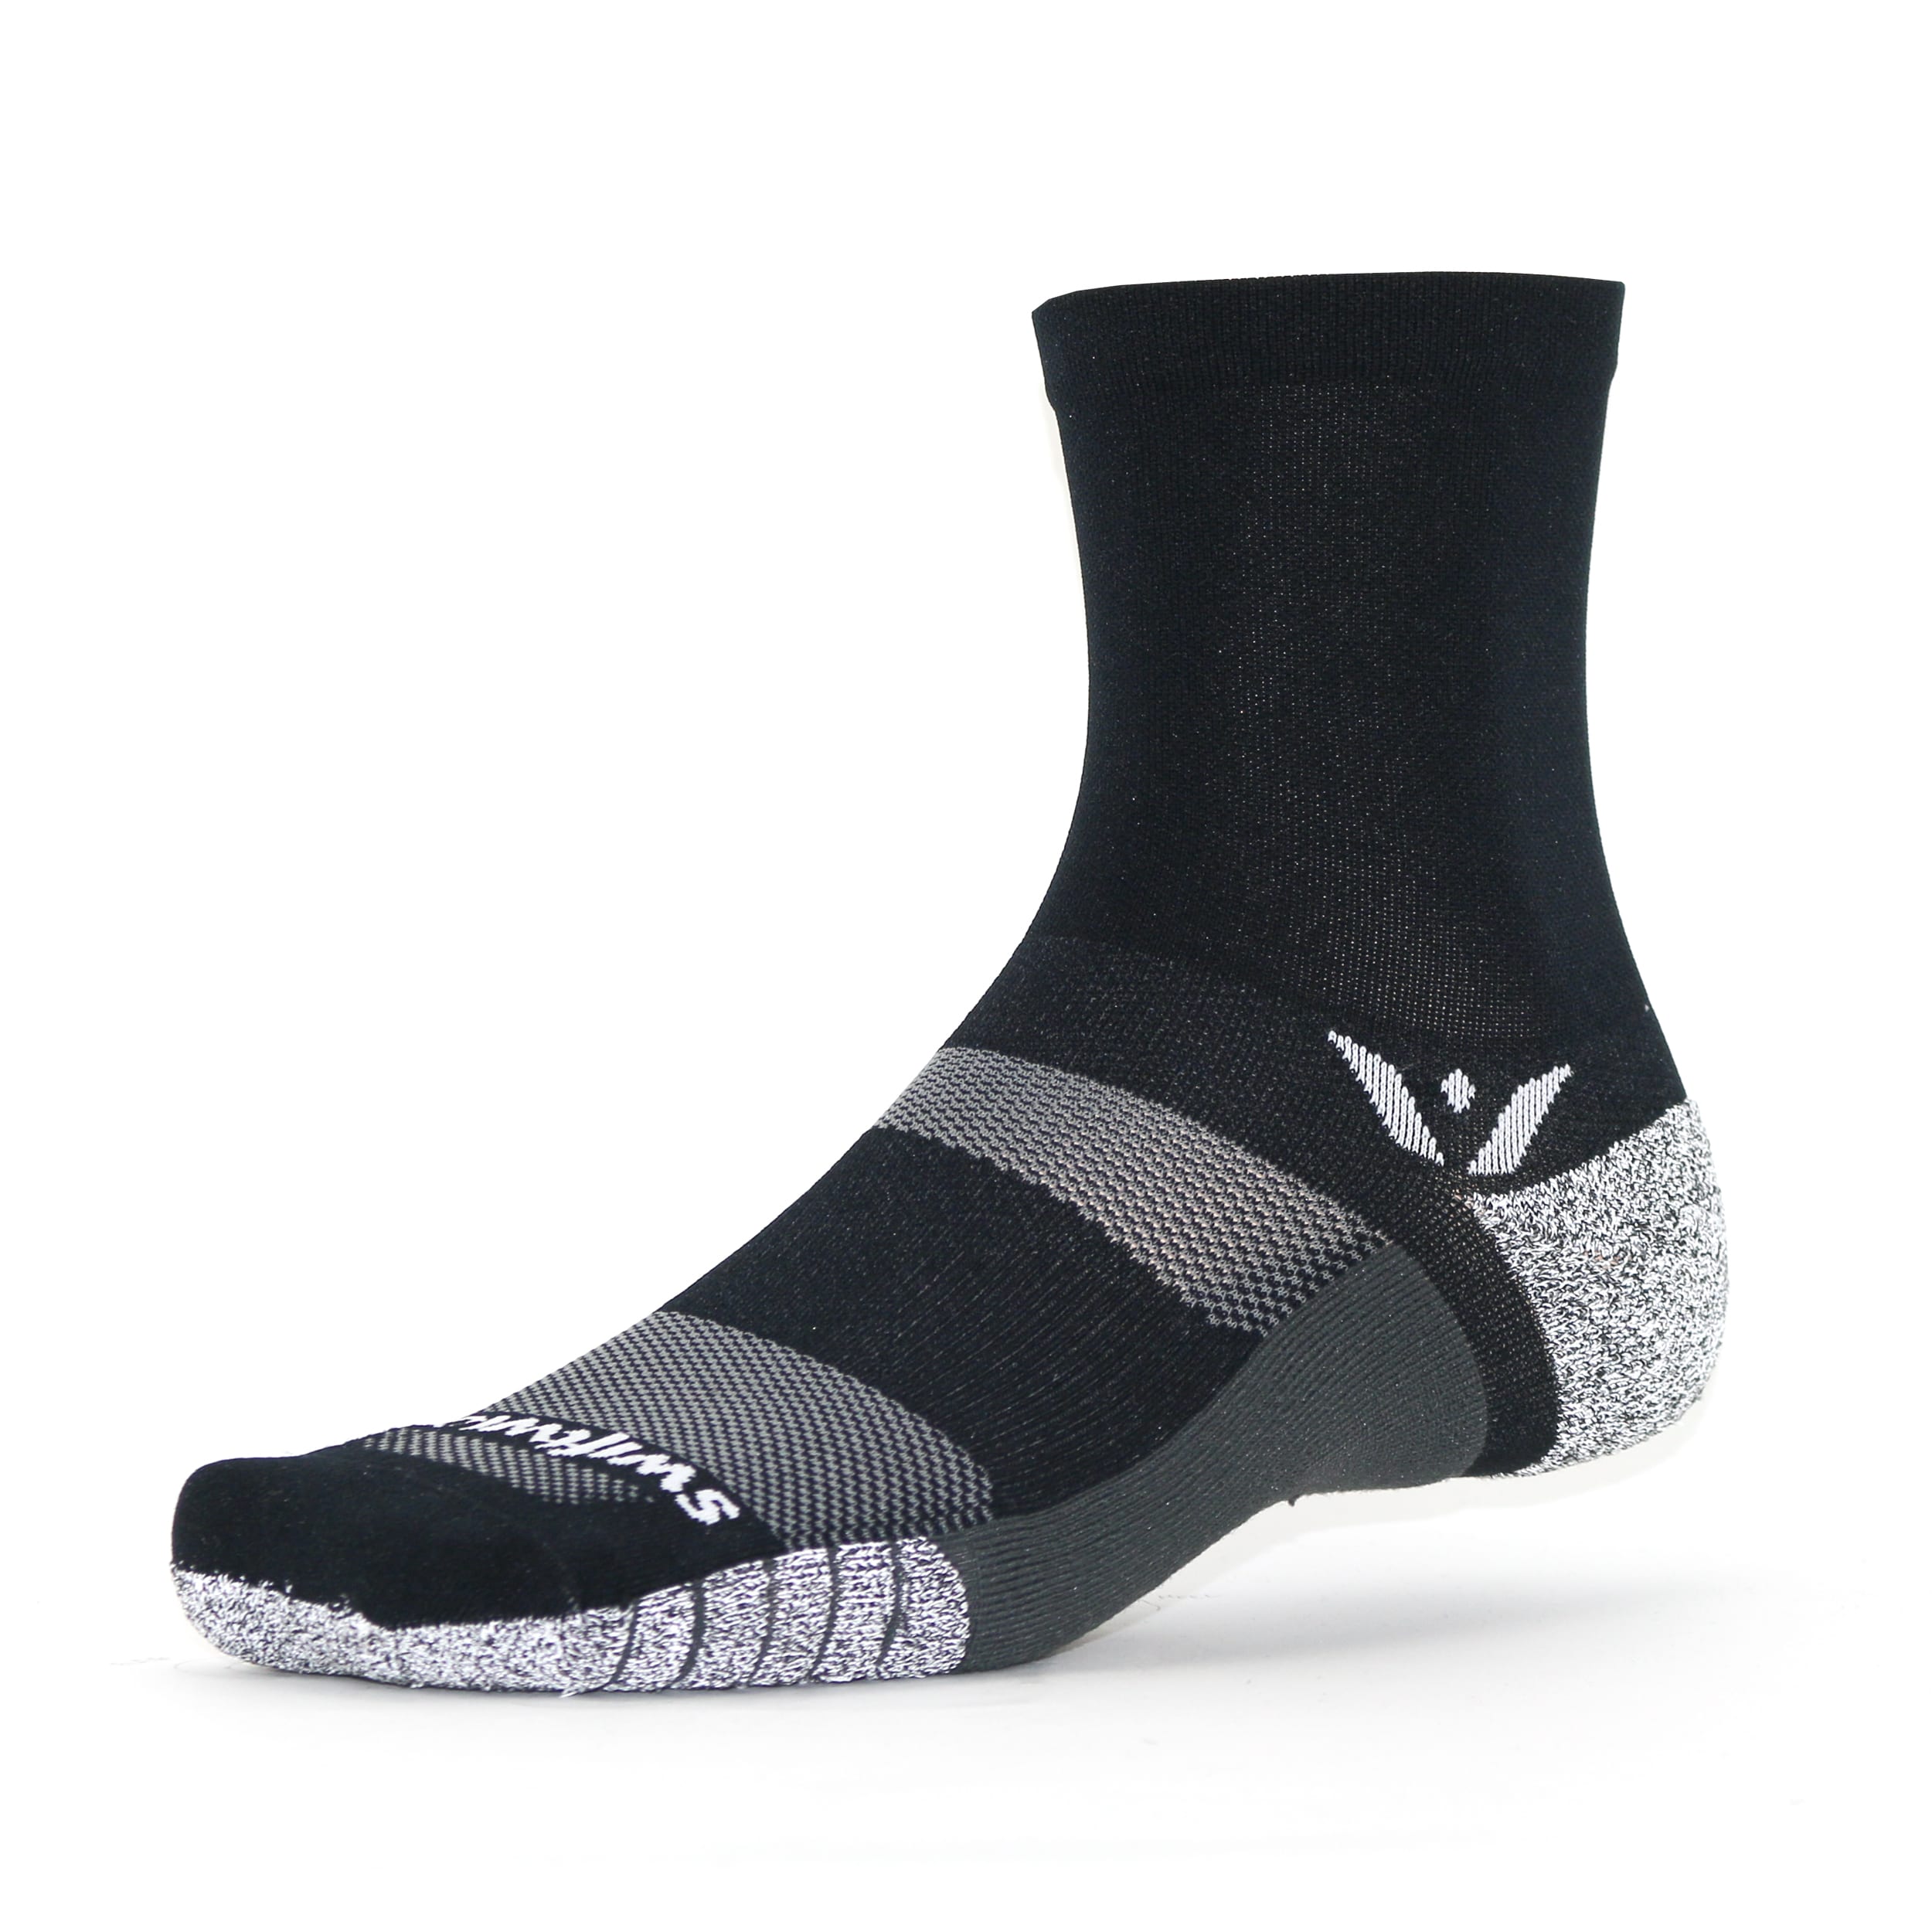 Swiftwick- ASPIRE ZERO (3 Pairs) Running ＆ Cycling Socks, No-Show, Compression Fit (Black, Large)